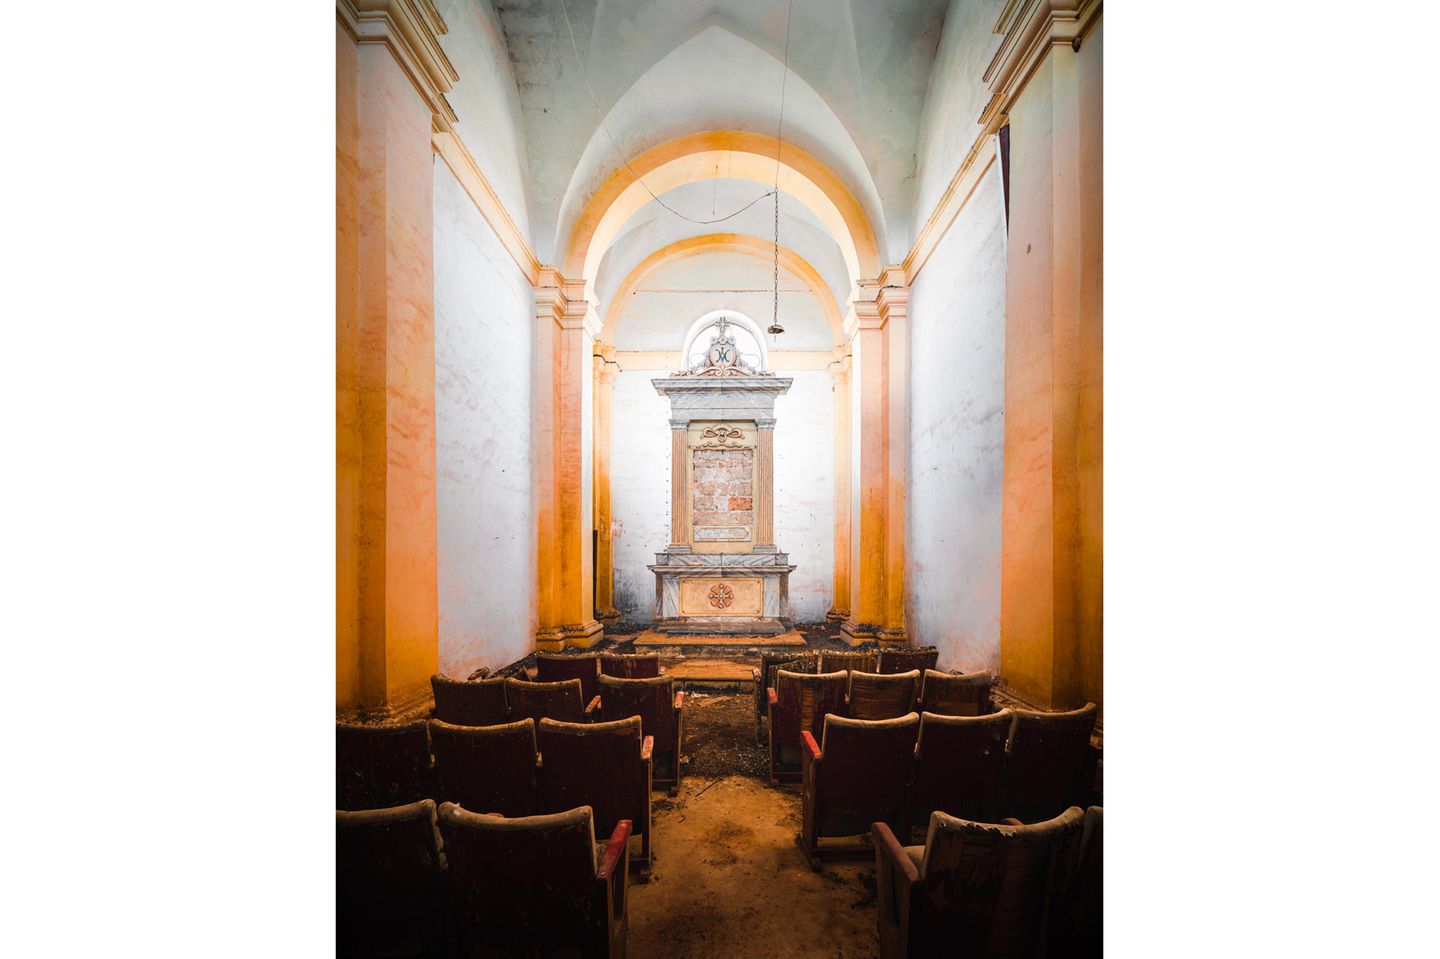 Photo 3: Photographed this chapel in the Puglia region. The chapel is part of an abandoned farm house, that’s located along a quiet dirt road. The seats in the church remind me of a cinema.